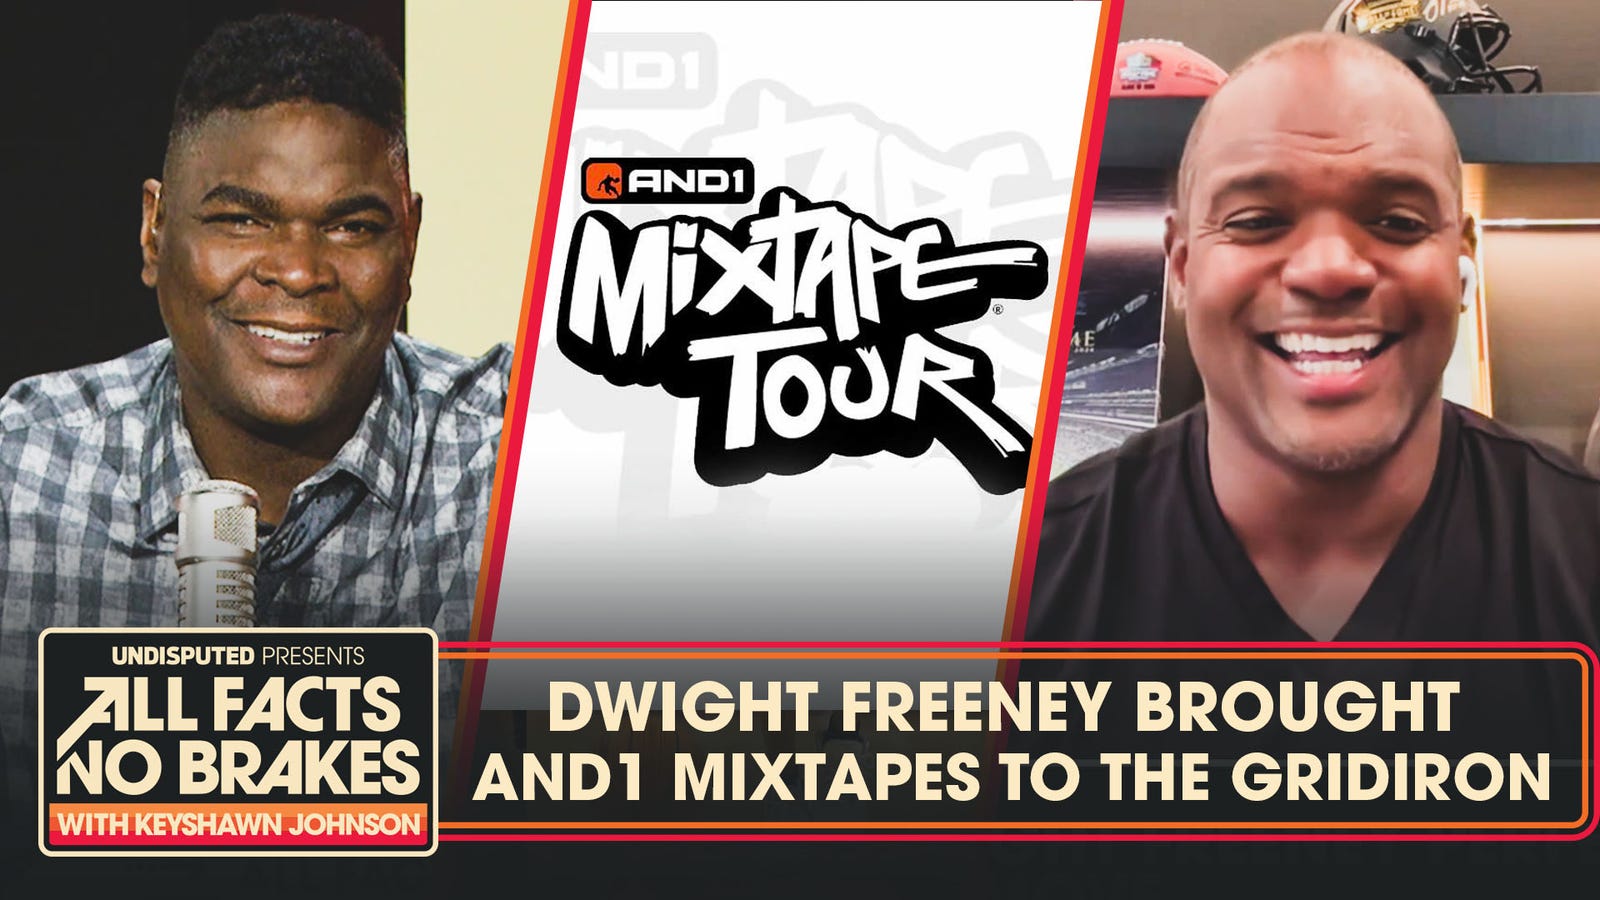  Dwight Freeney Brought And1 Mixtape Tour to the NFL | All Facts No Brakes